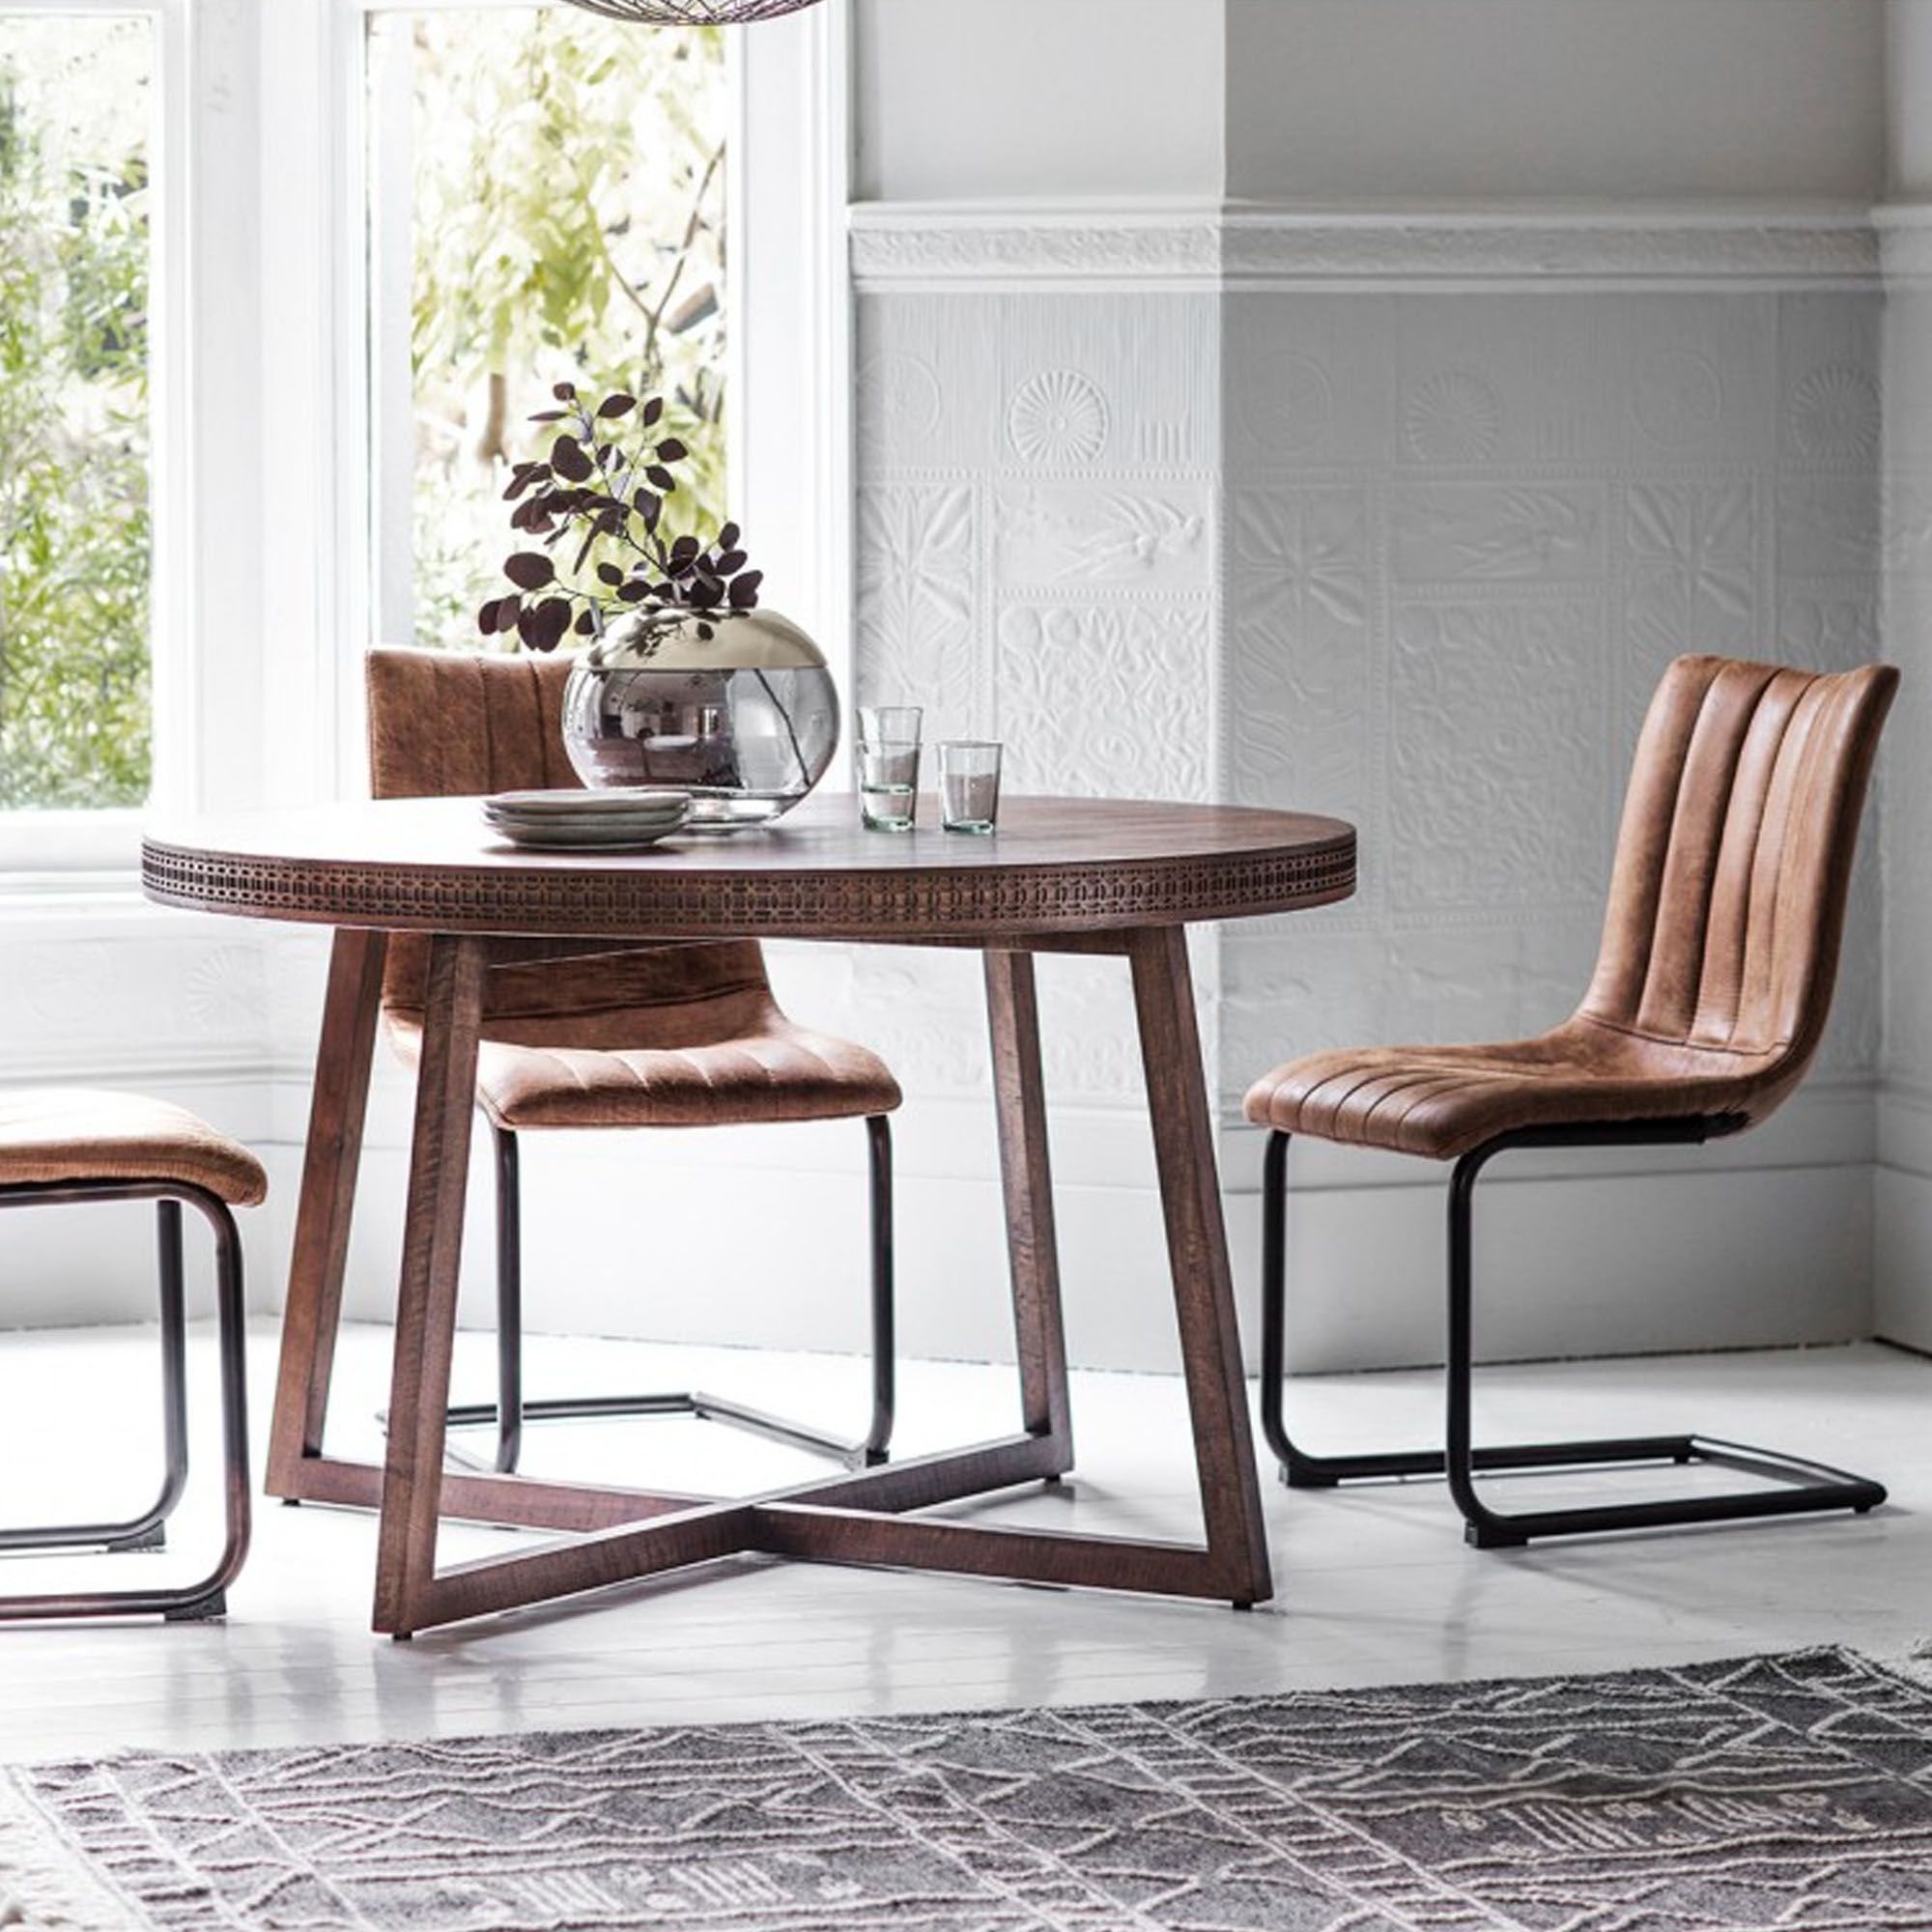 Most Popular Boho Round Dining Table Intended For Round Dining Tables (View 12 of 30)